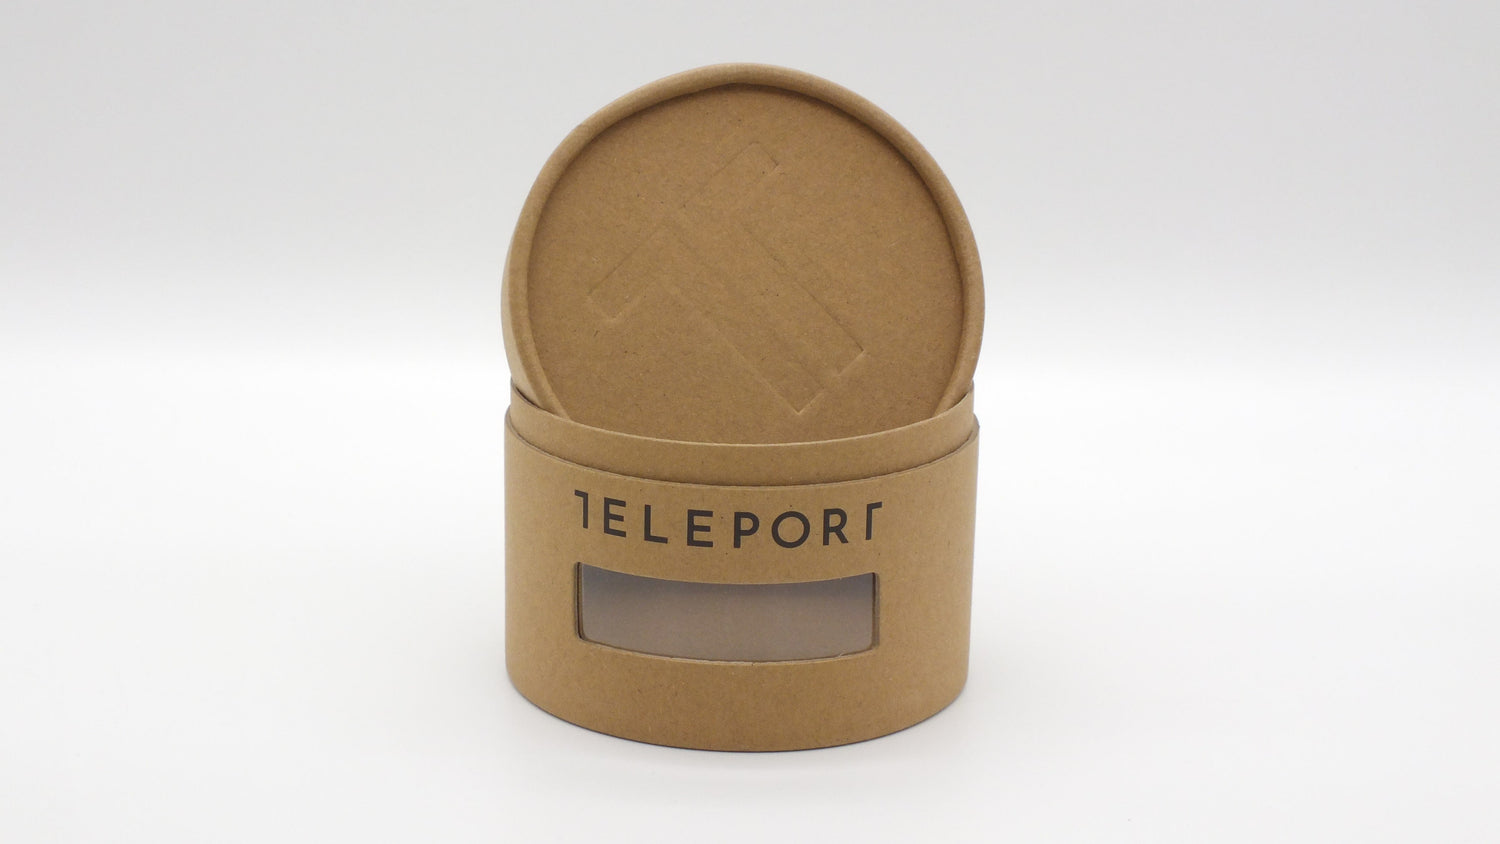 The Teleport Teleport Switch Box